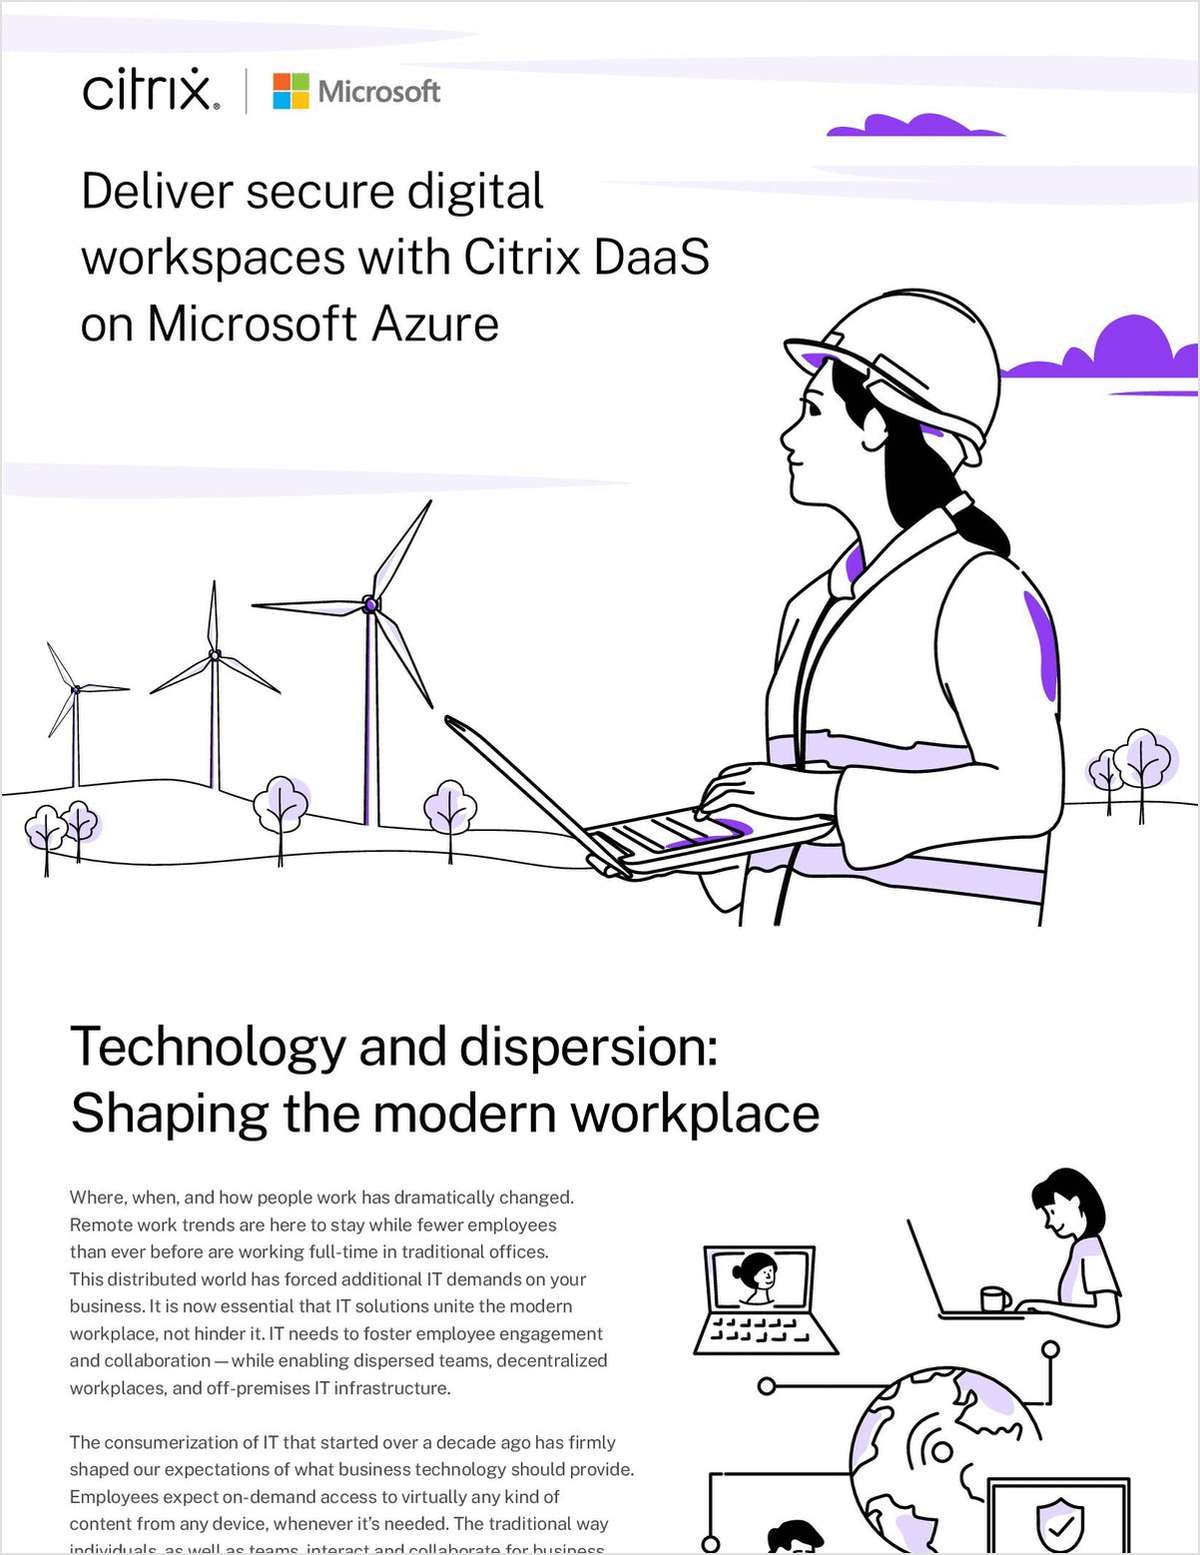 Deliver secure digital workspaces with Citrix DaaS on Microsoft Azure